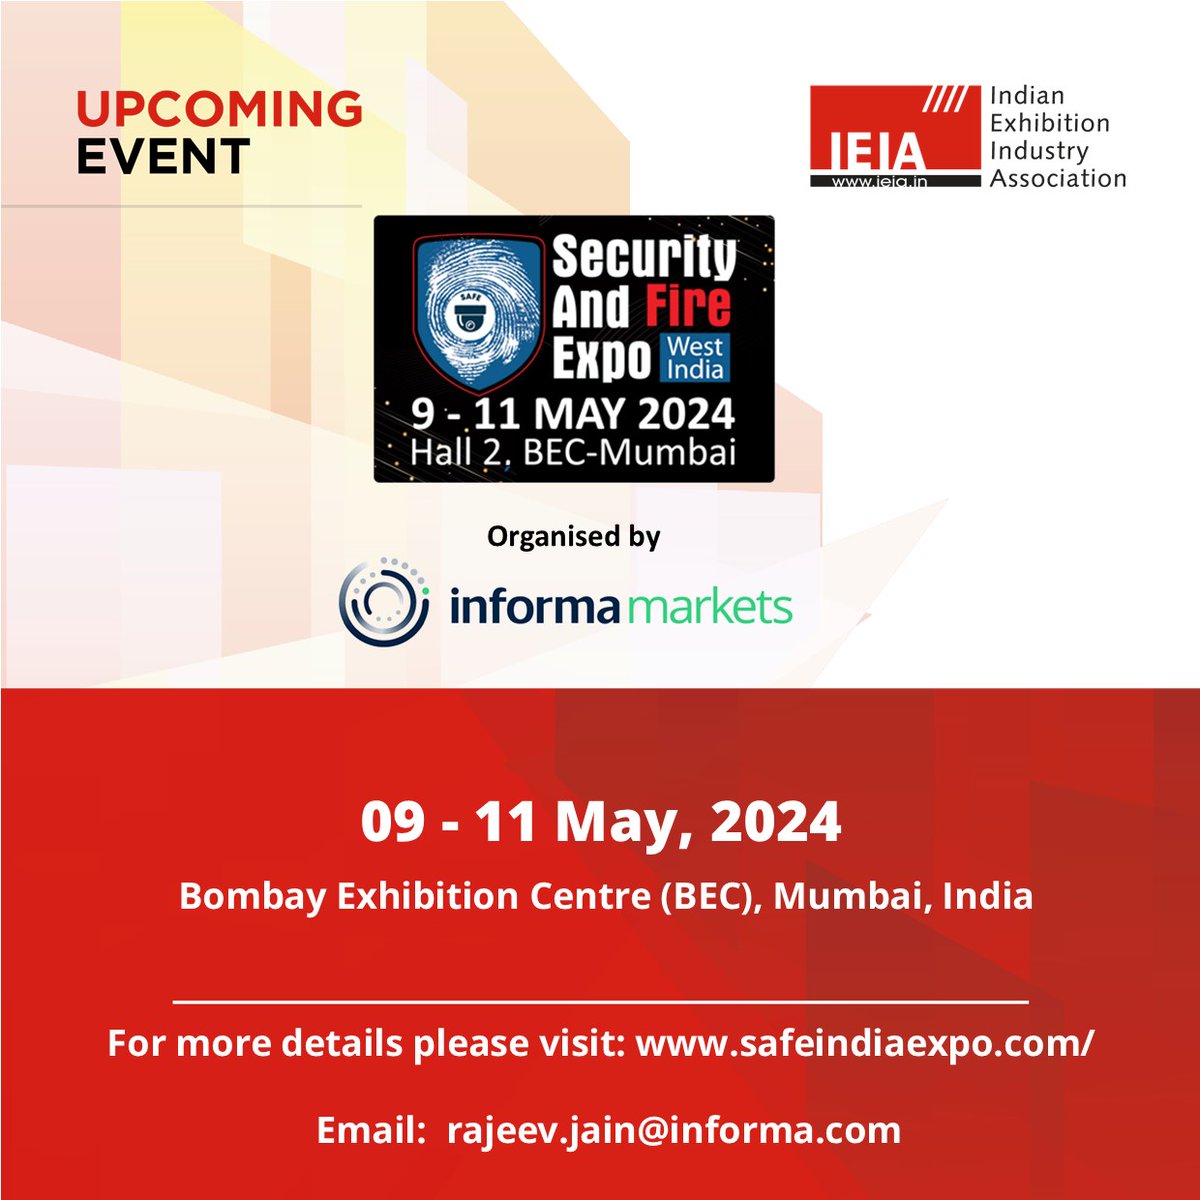 #IEIA upcoming member event: Security & Fire Expo 2024 For more details: safeindiaexpo.com/west/index.php @IndiaIFSEC @in_informa #SecurityAndFireExpo2024 #SecurityAndFireExpoMumbai #IEIA #IEIAMembersEvent #IEIAMembership #Internationalexpo Be a member now- lnkd.in/gejg-Jh